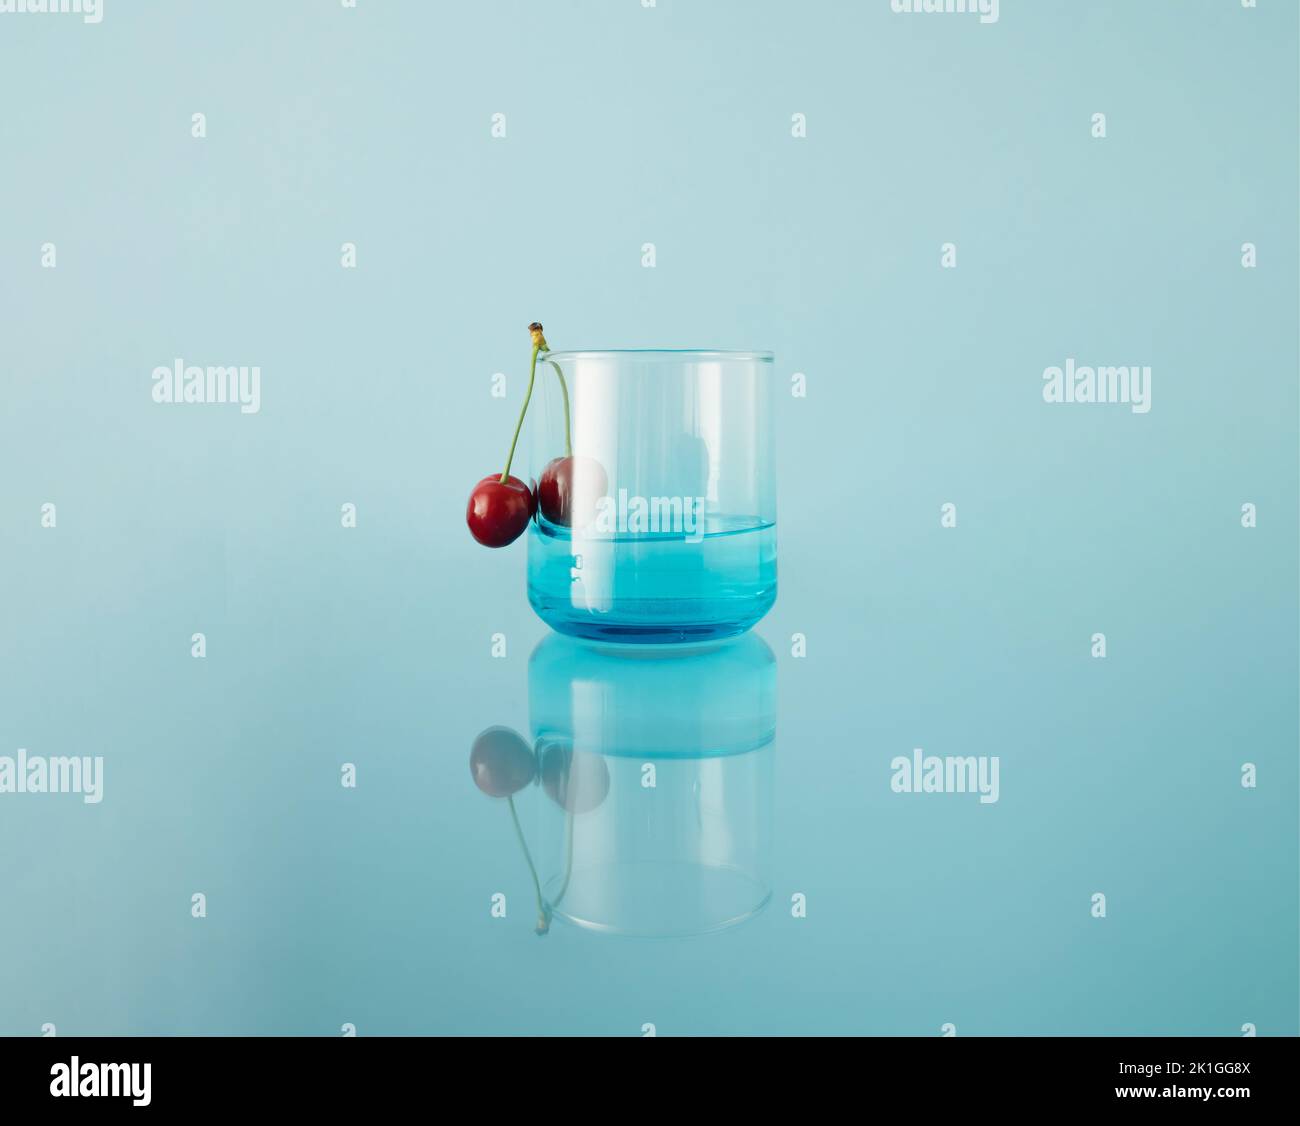 Drinking glass with fresh cherries on blue reflecting background. Mirror reflection. Stock Photo